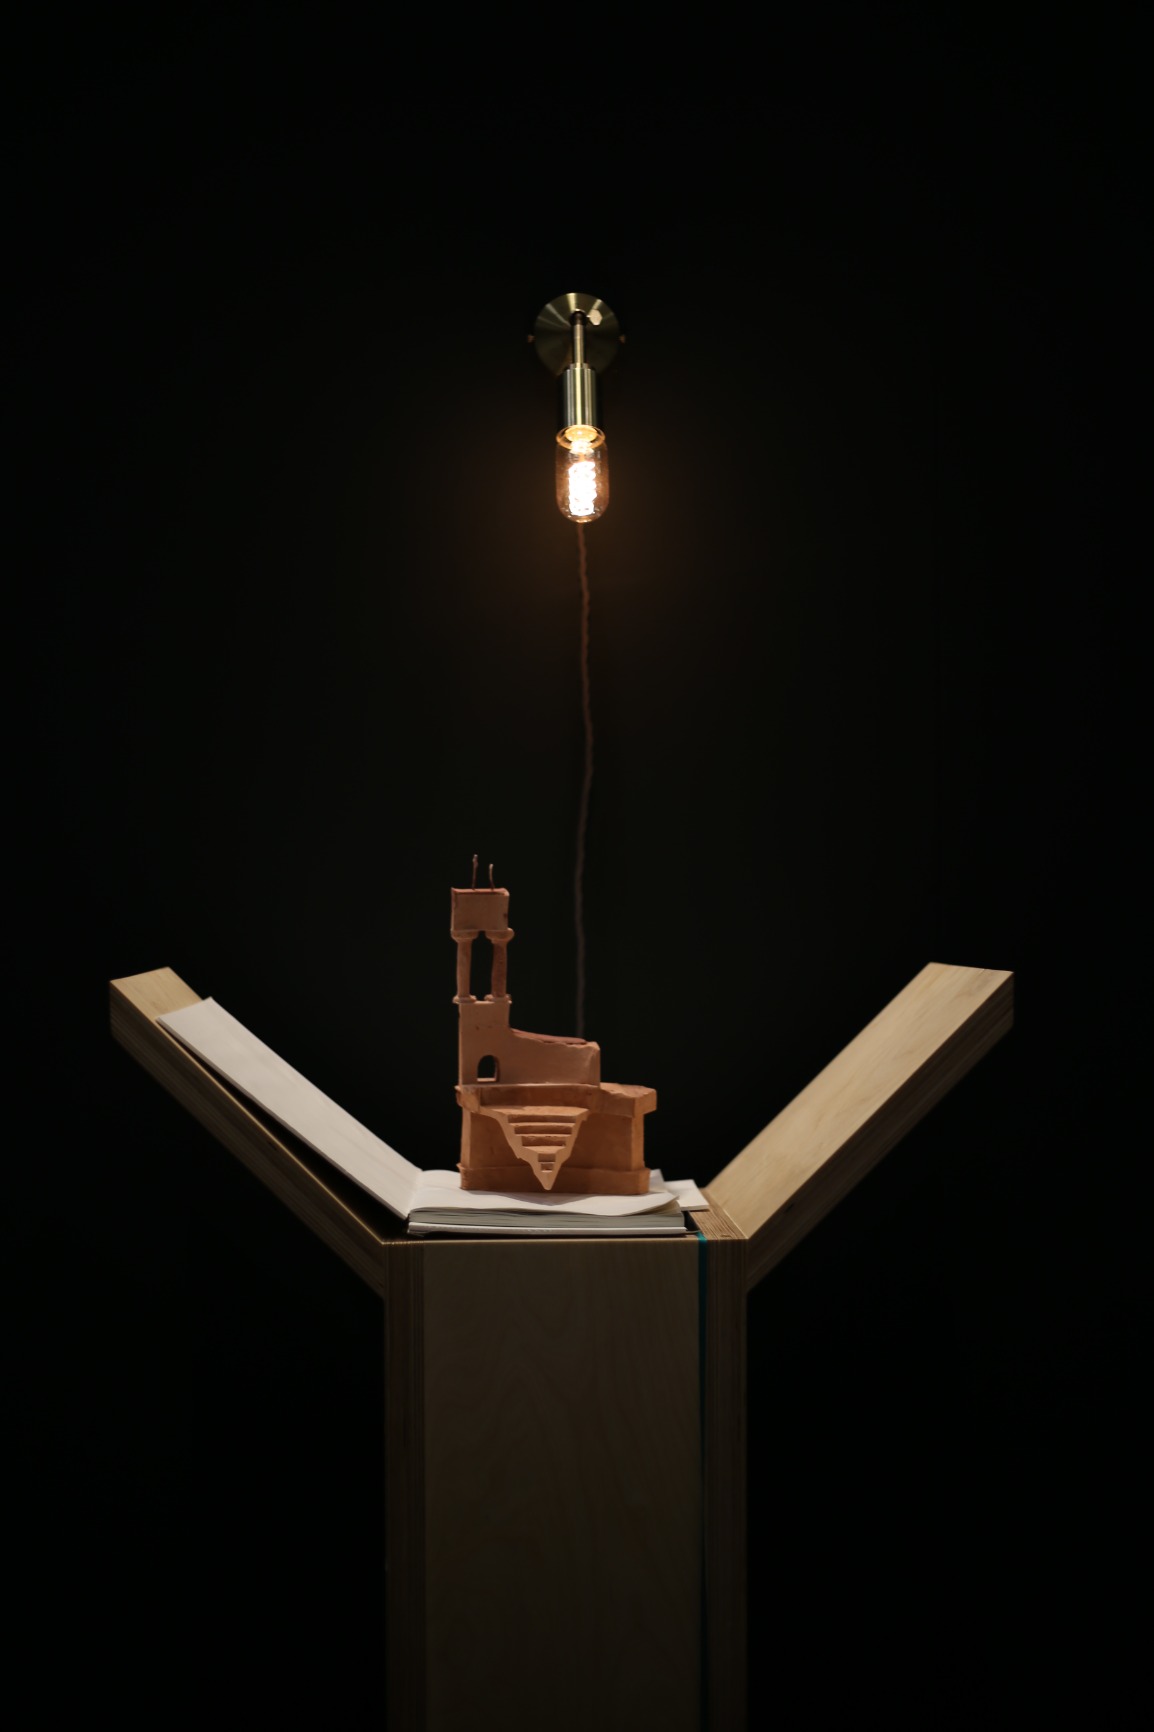 Photo of artwork fragment. Artwork is a series of 6 timber podiums. One podium is seen in this photo with clay model of ampitheatre sitting on top of book on top of podium. The background is darkly lit.